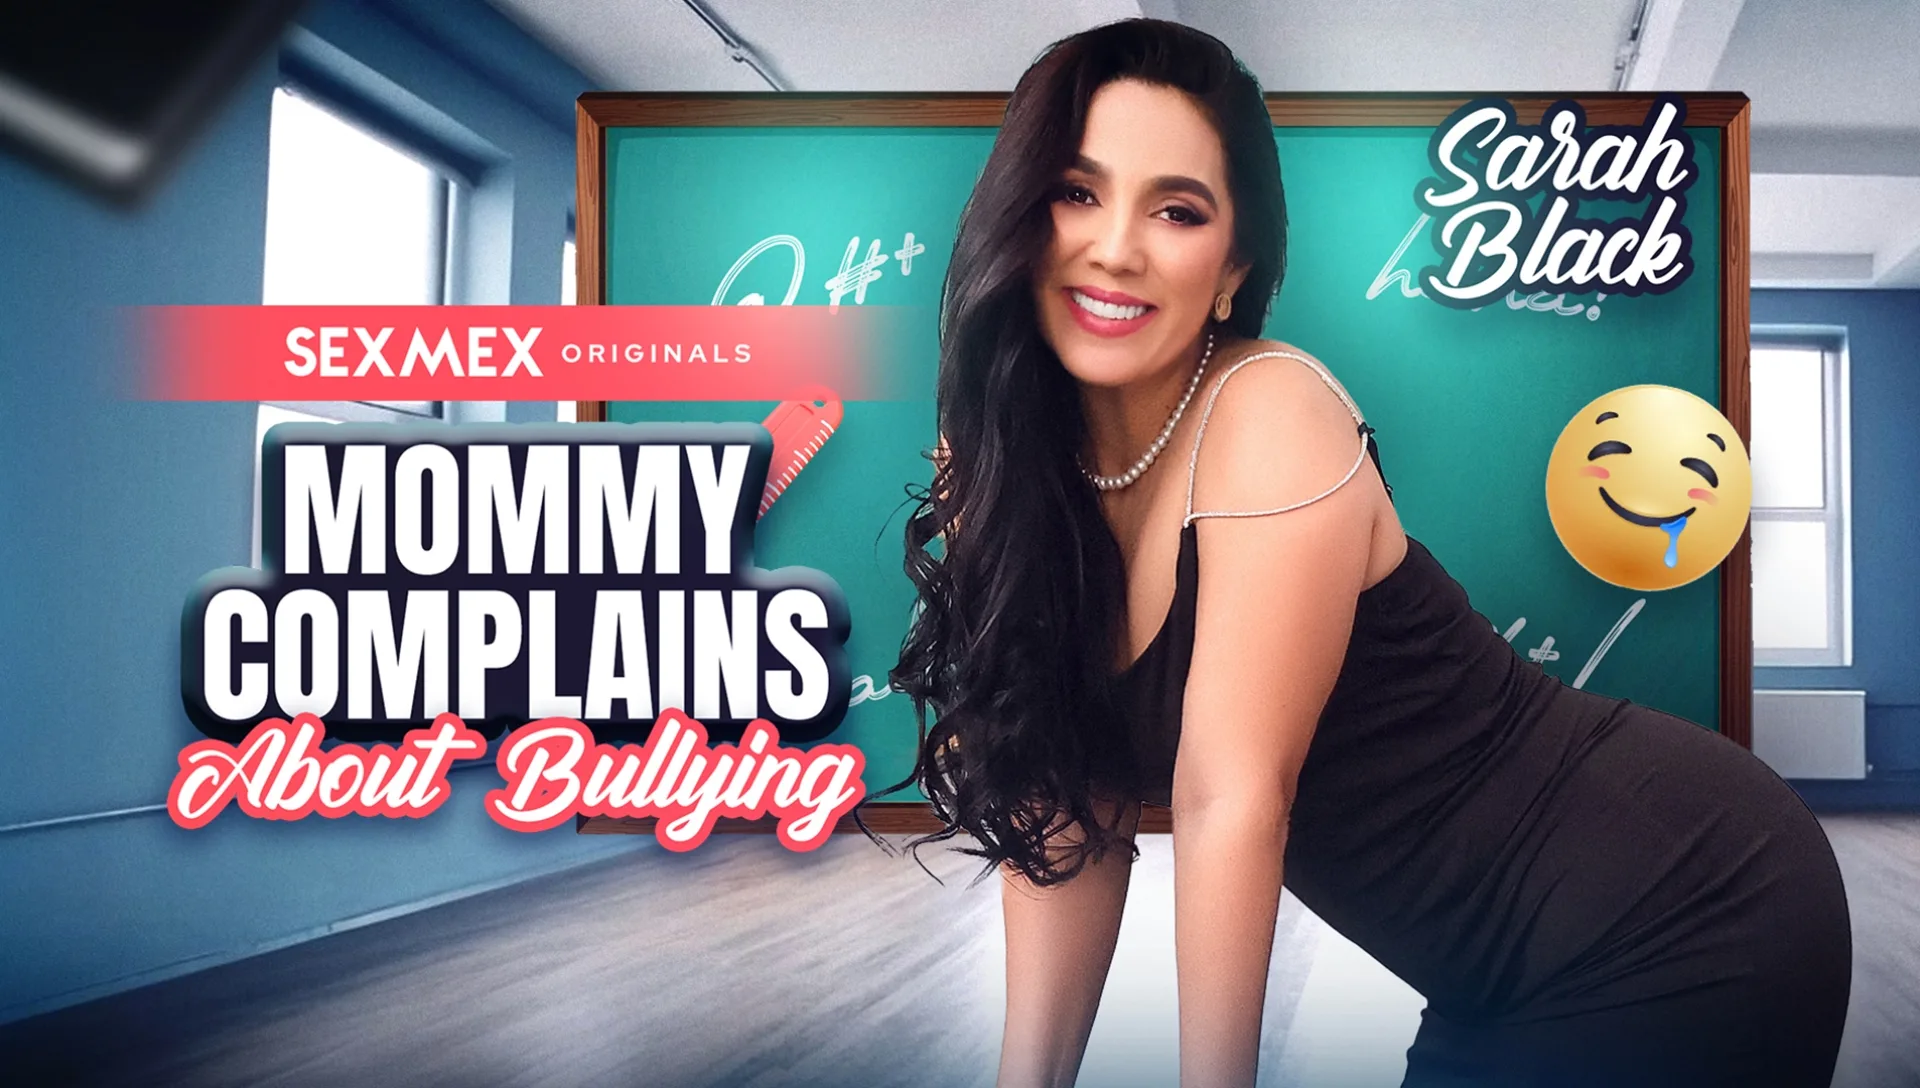 Mommy Complains About Bullying . Sarah Black - SEXMEX